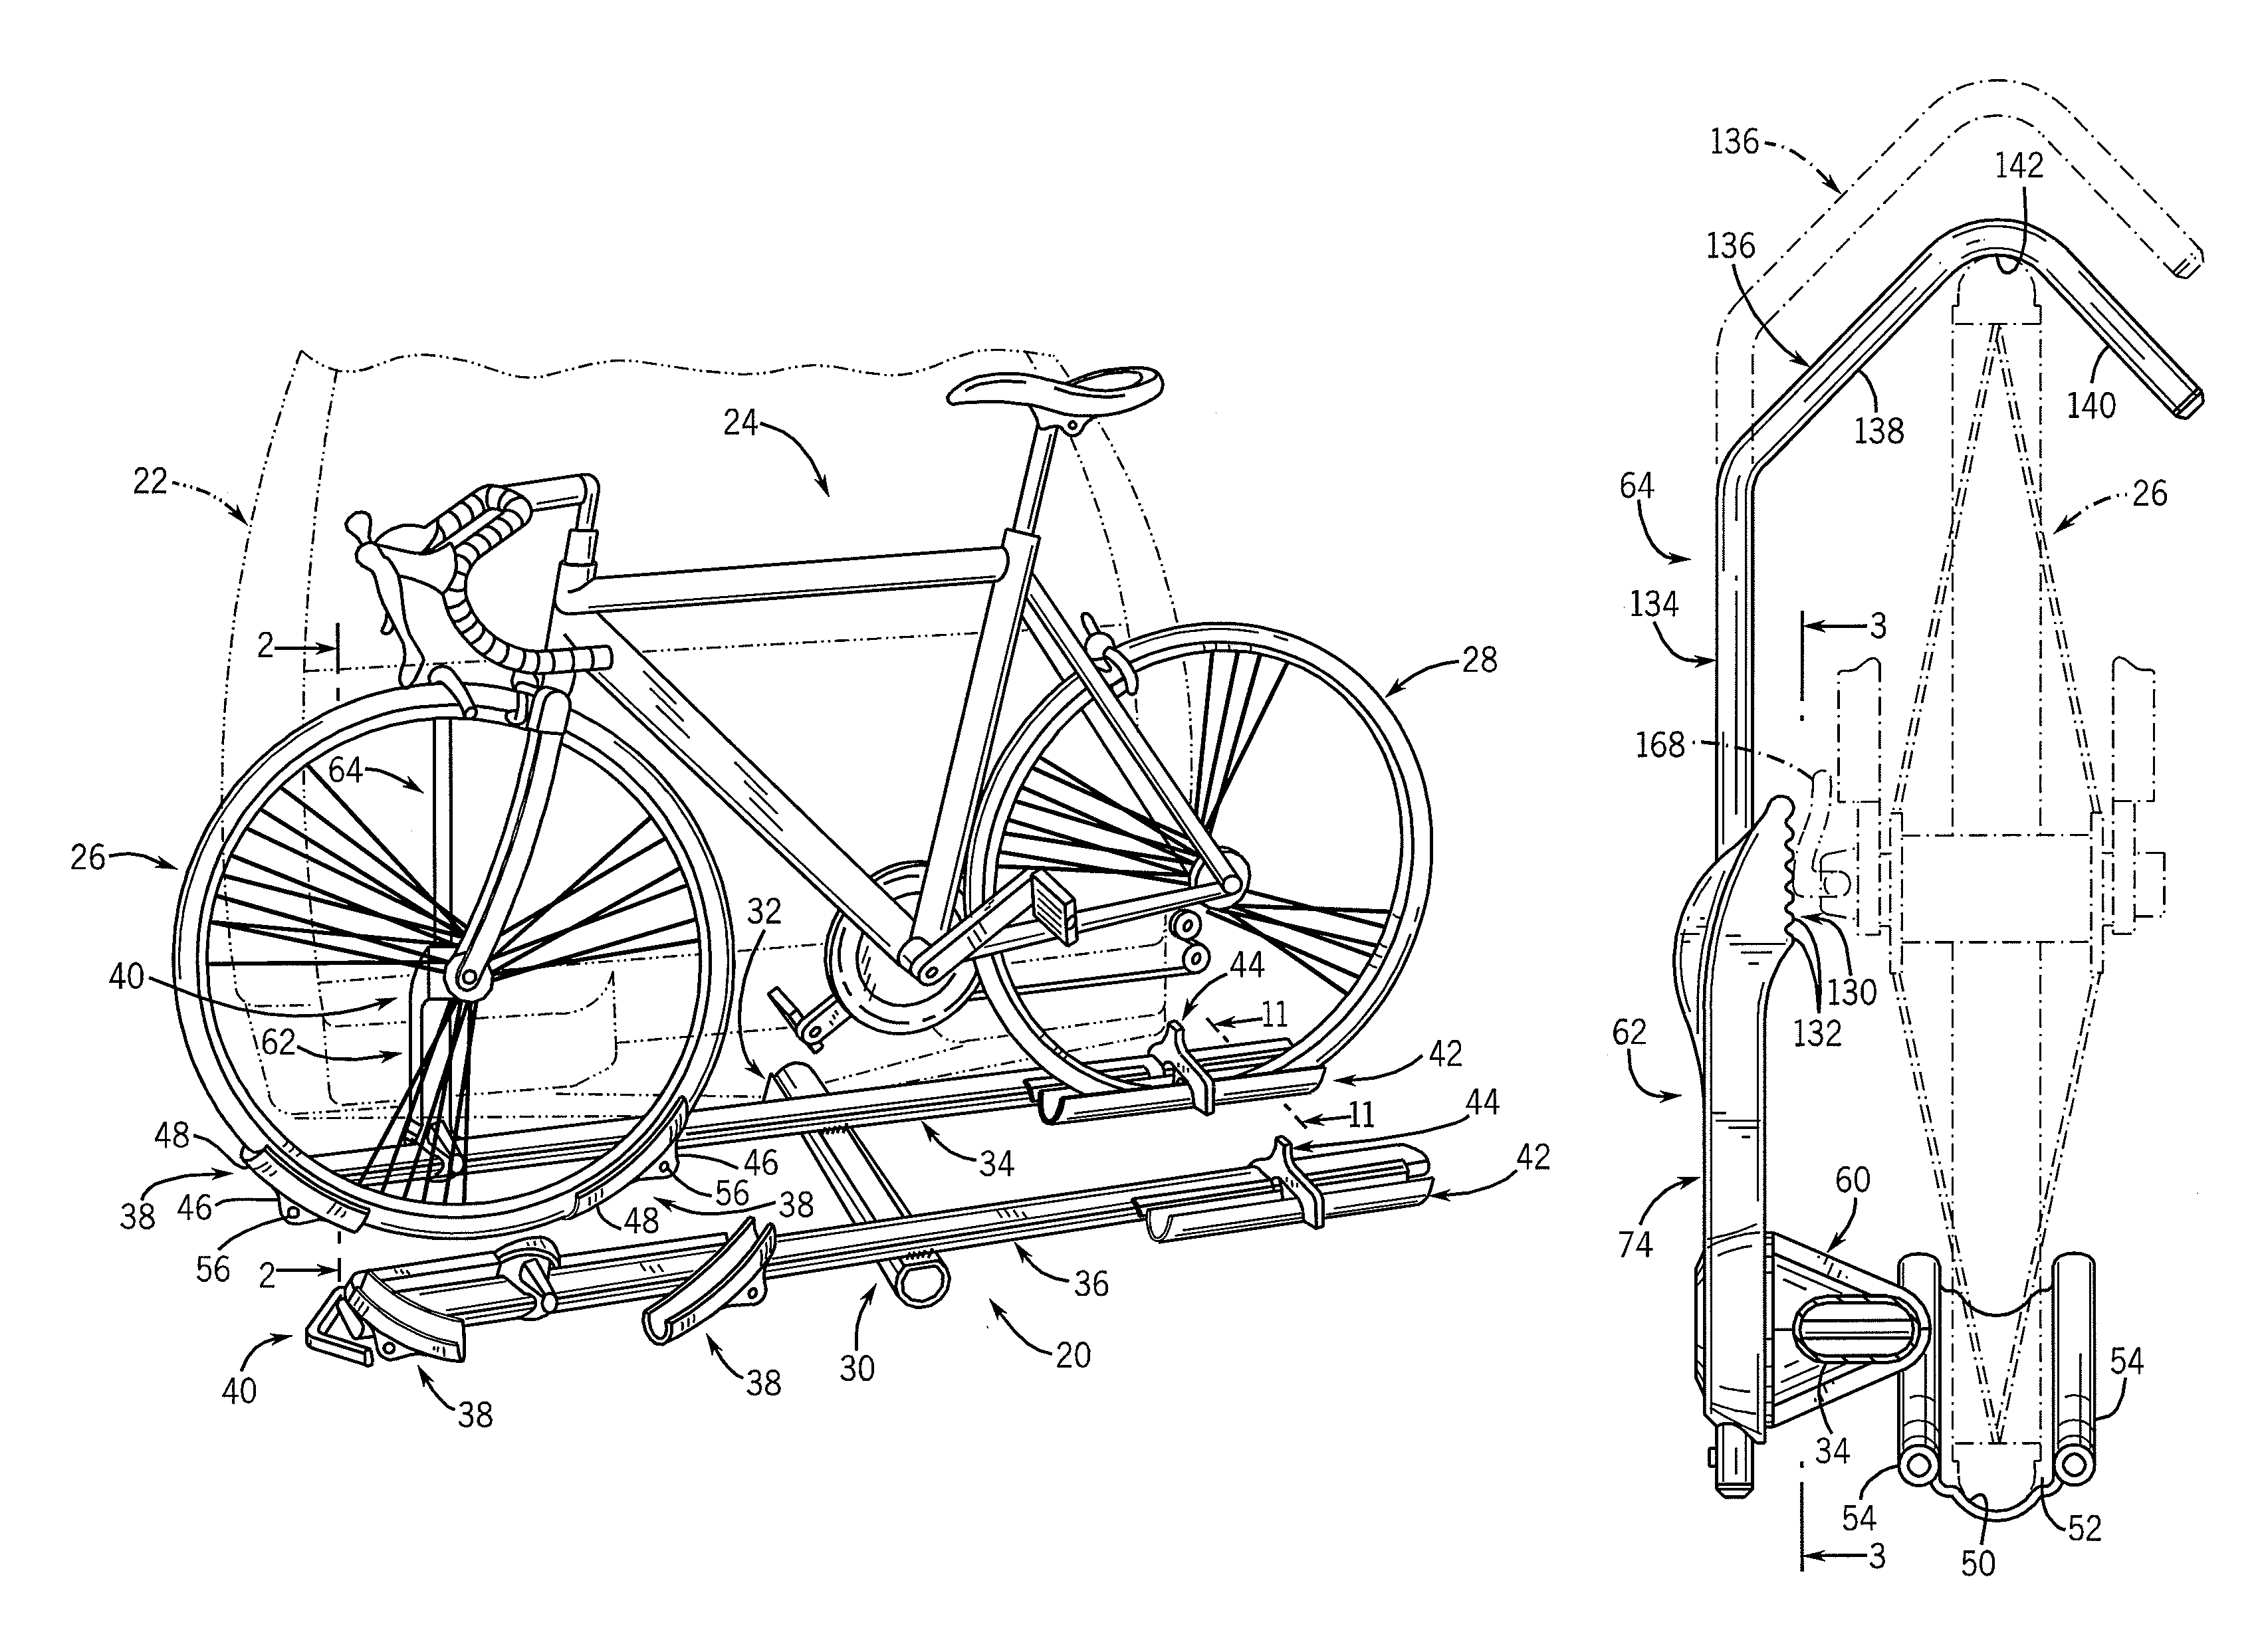 Pivoting support arrangement for maintaining a bicycle wheel in an upright position